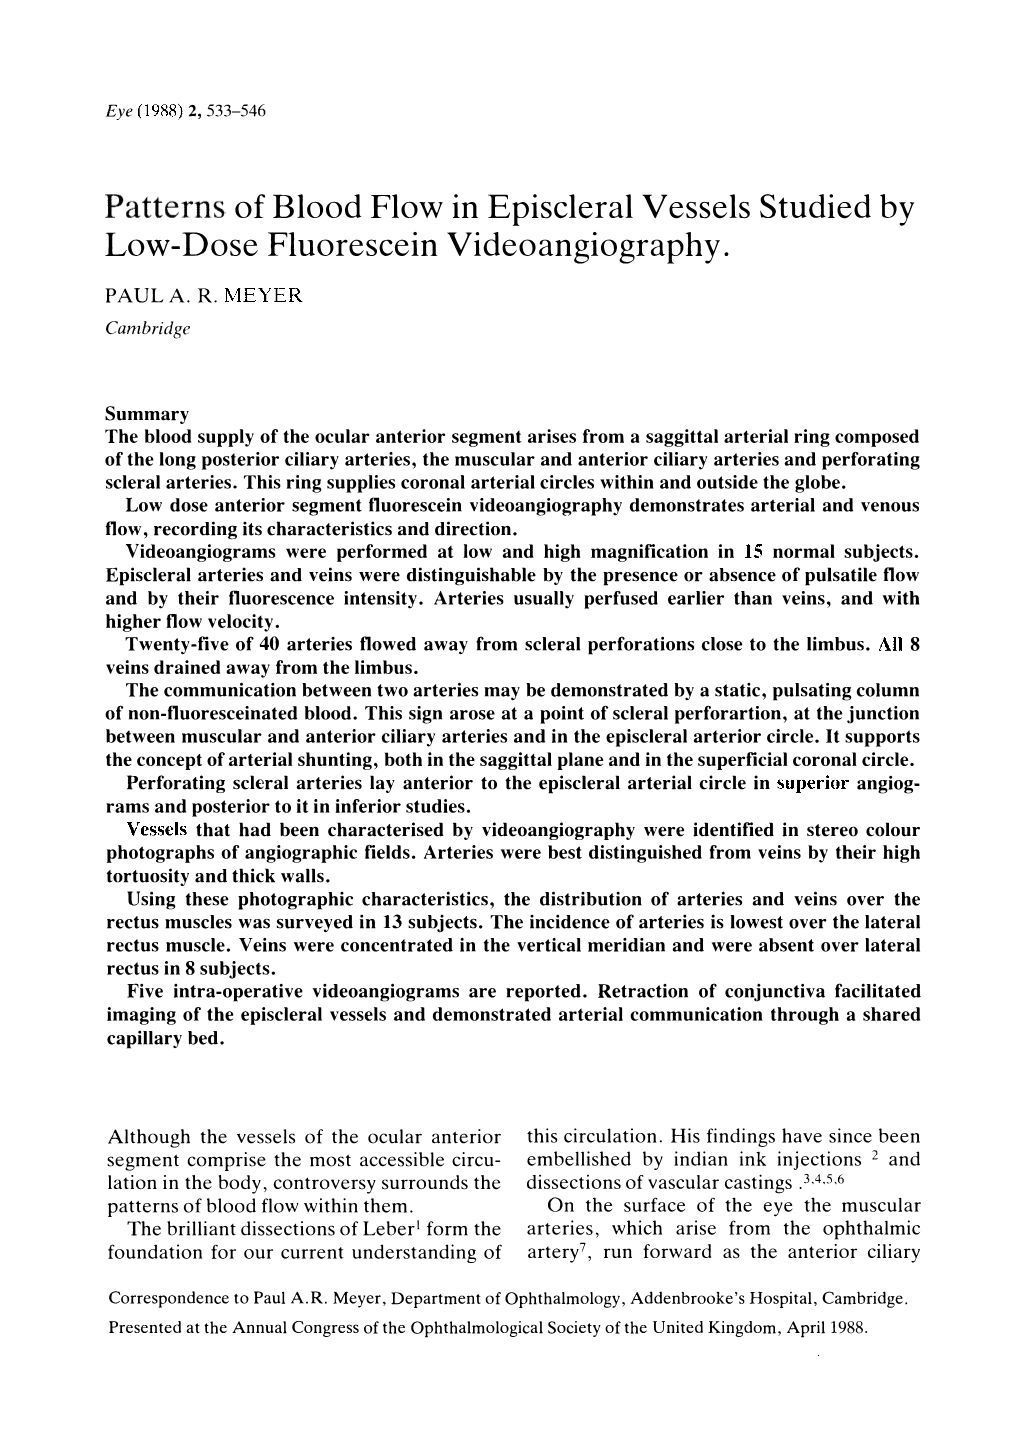 Patterns of Blood Flow in Episcleral Vessels Studied by Low-Dose Fluorescein Videoangiography